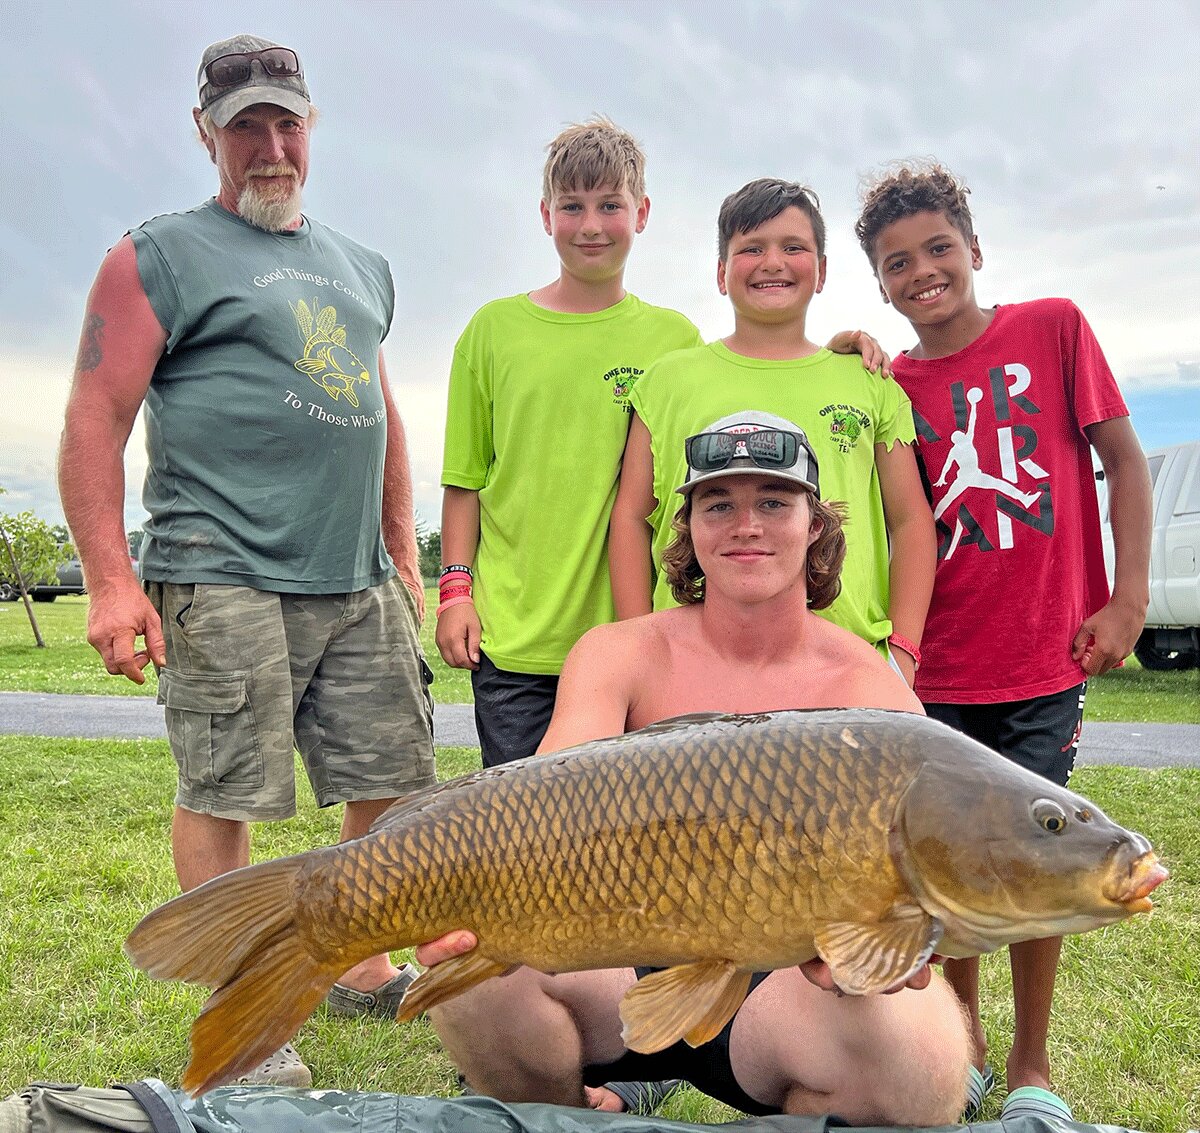 The first place team “One on Baits” is pictured above. Front row holding a massive carp is Tanner Smith. Back row standing are coach Shawn Rafter, Cameron Fuller, Gavin Thompson, and Joey Green. Photo submitted.